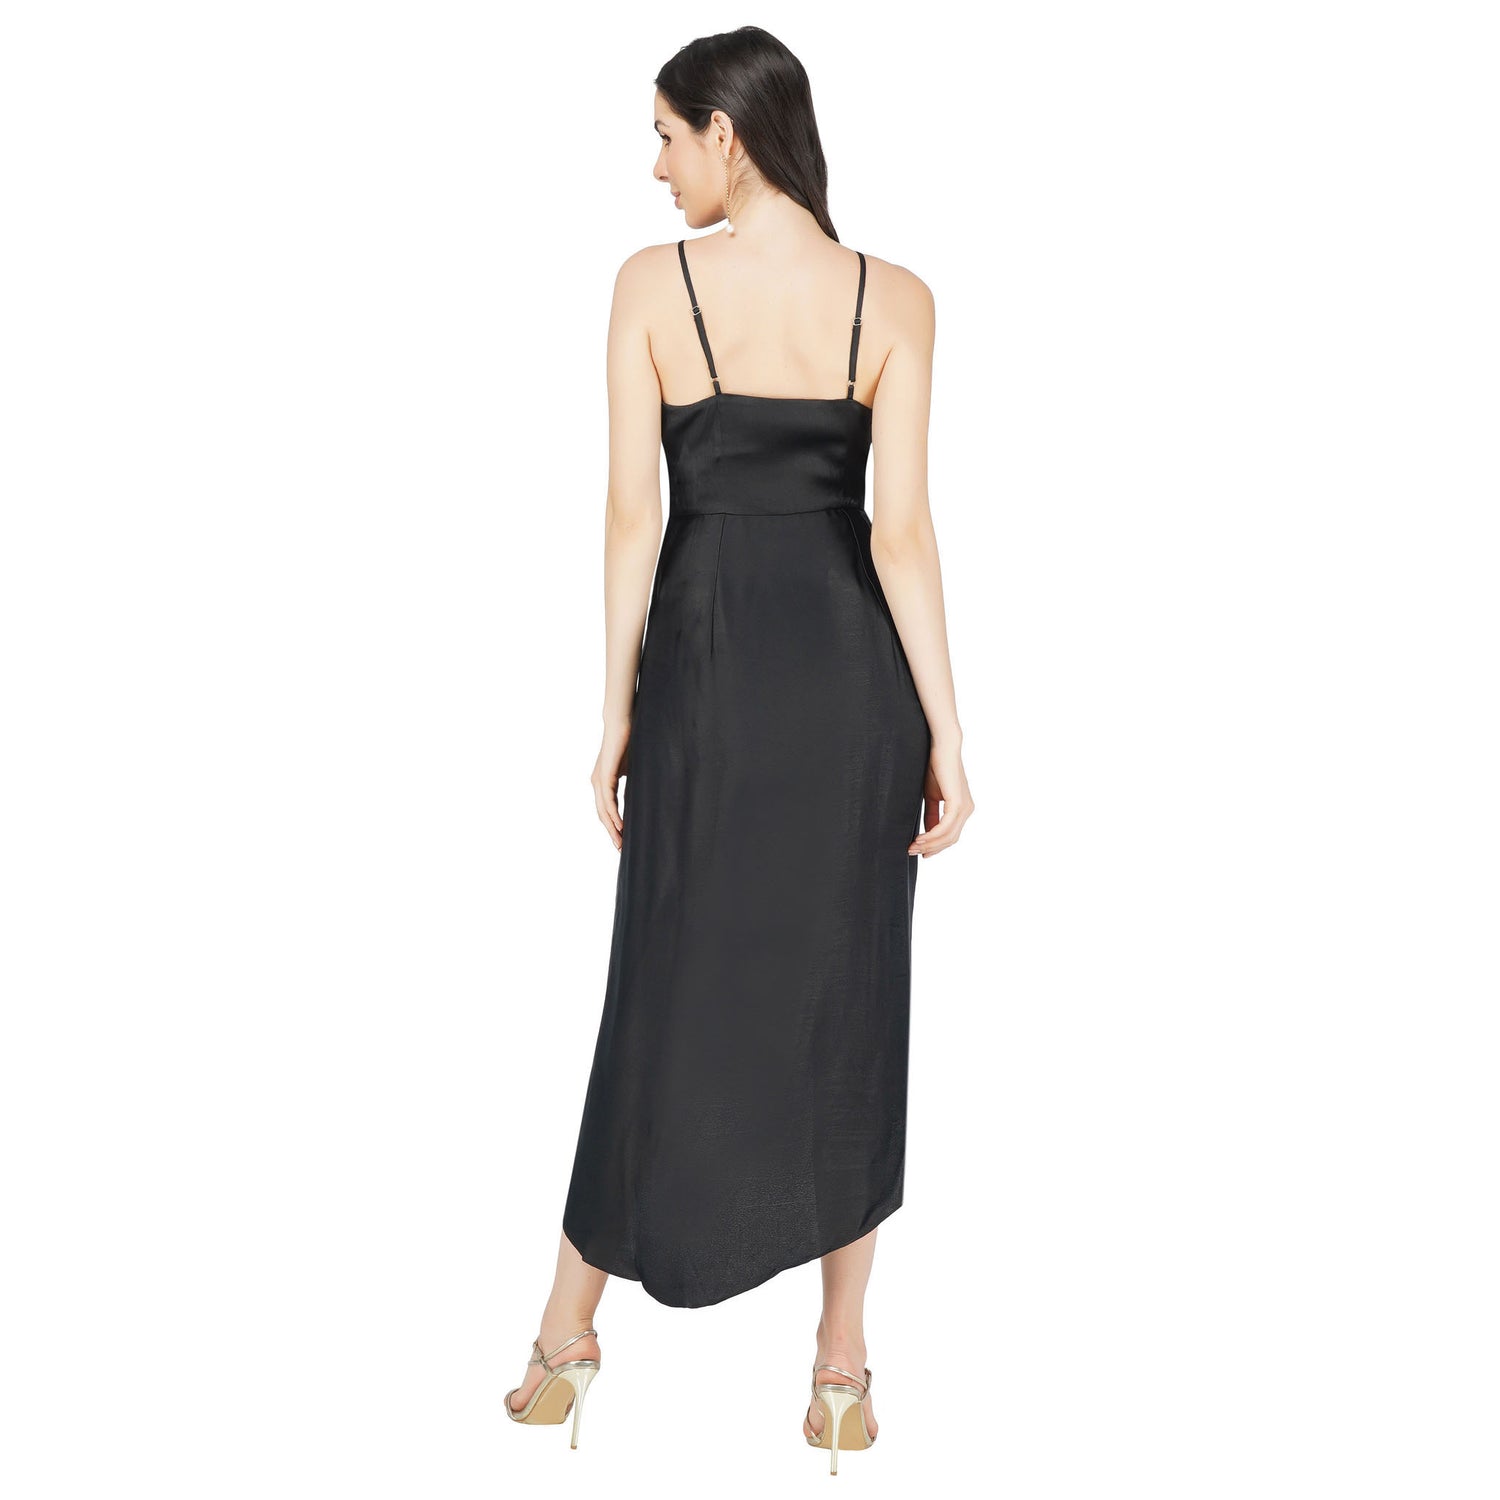 SLAY. Women's Black Shimmer Fabric Ruched Satin Maxi Dress with Front Slit-clothing-to-slay.myshopify.com-